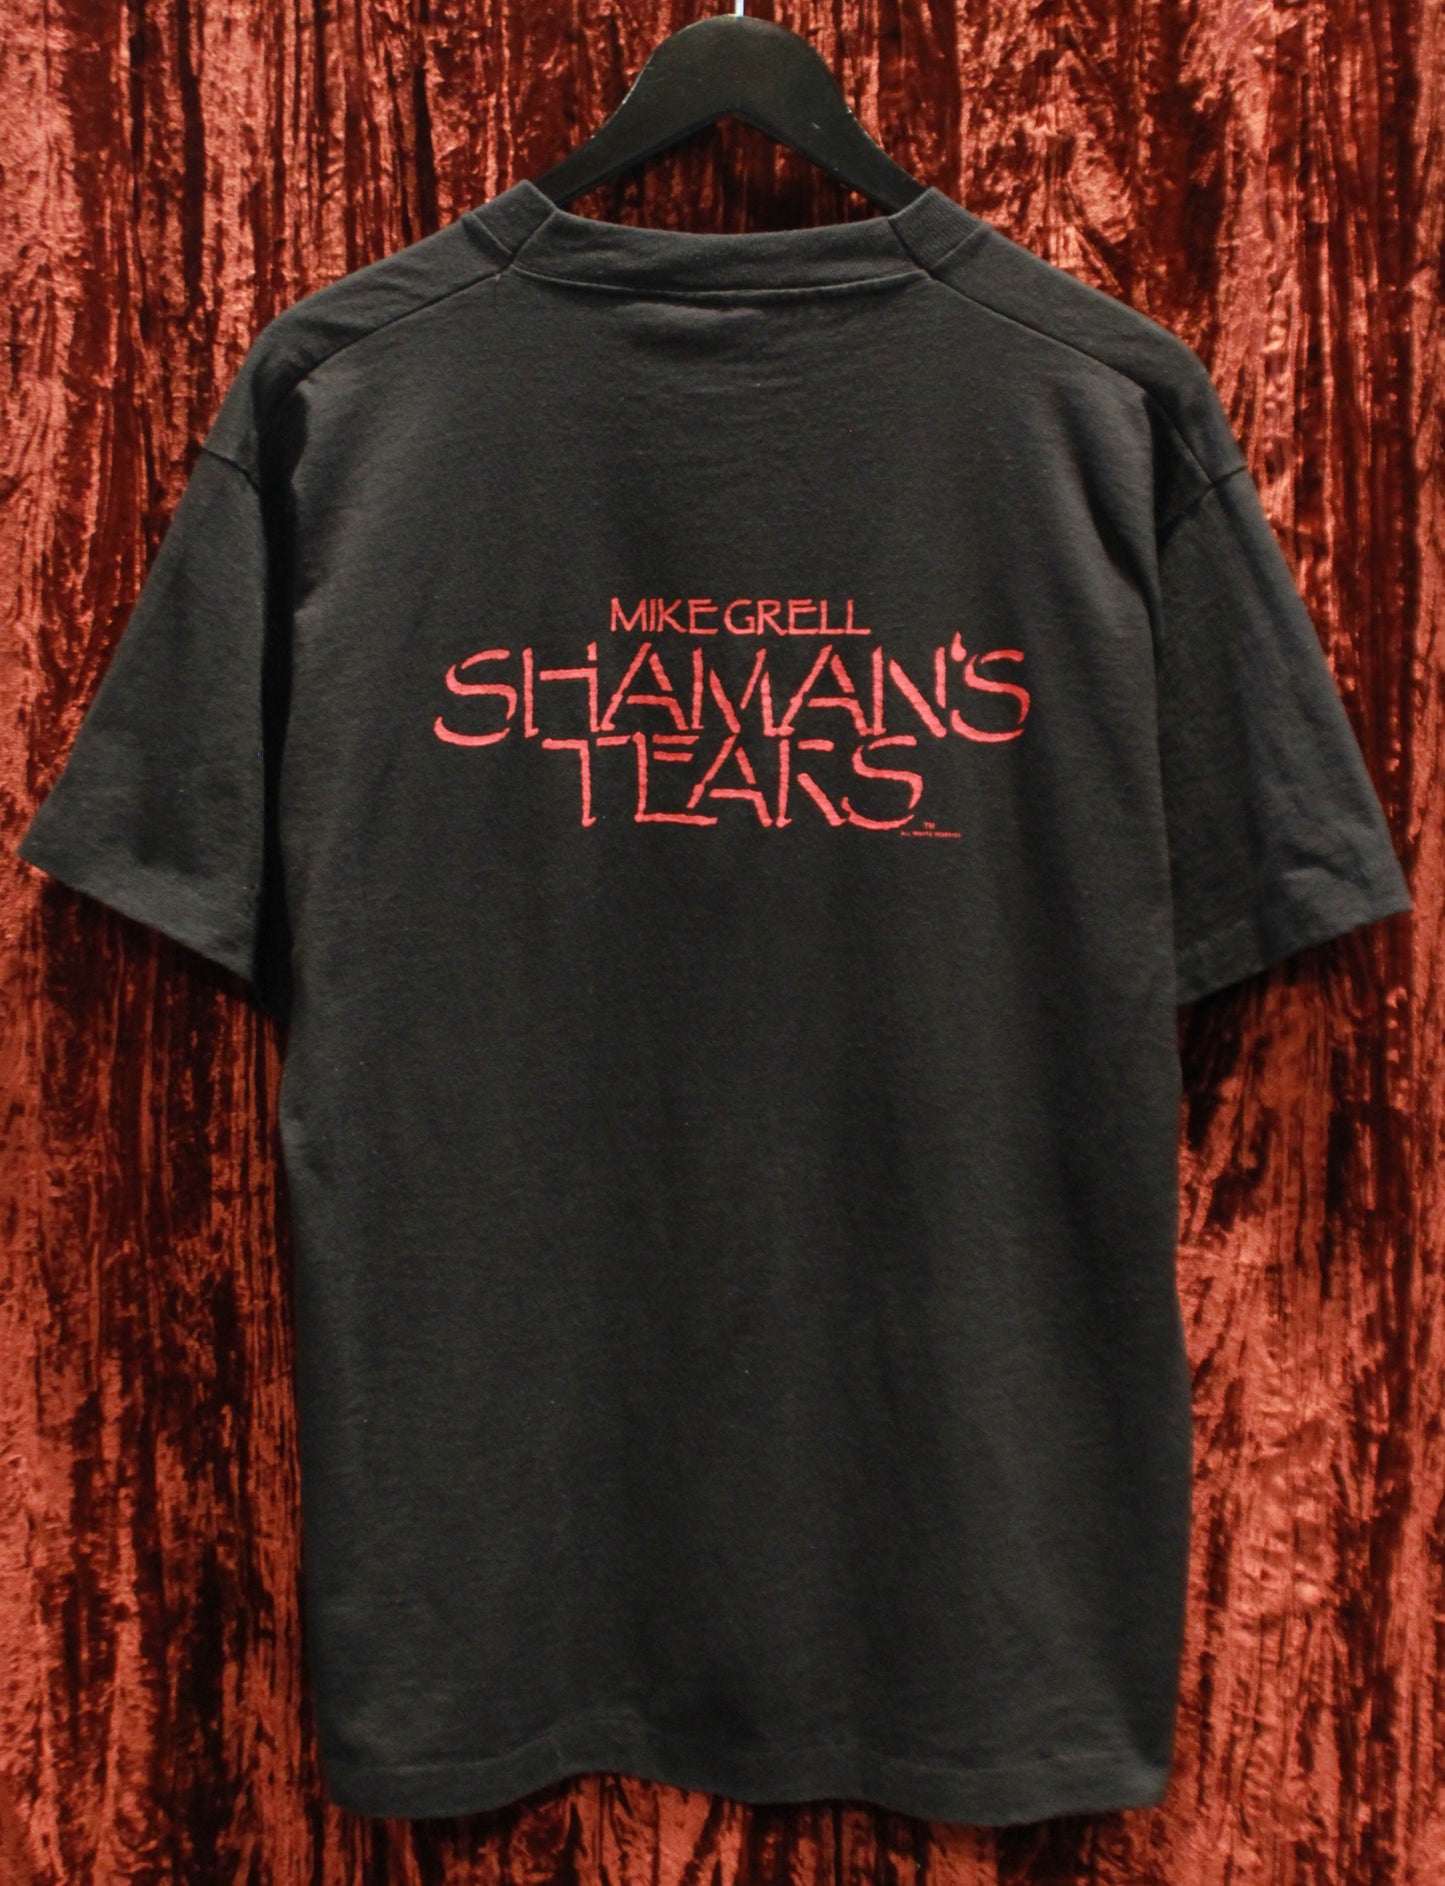 Vintage Shaman's Tears Graphic T Shirt Mike Grell Comic Book Series Unisex Large